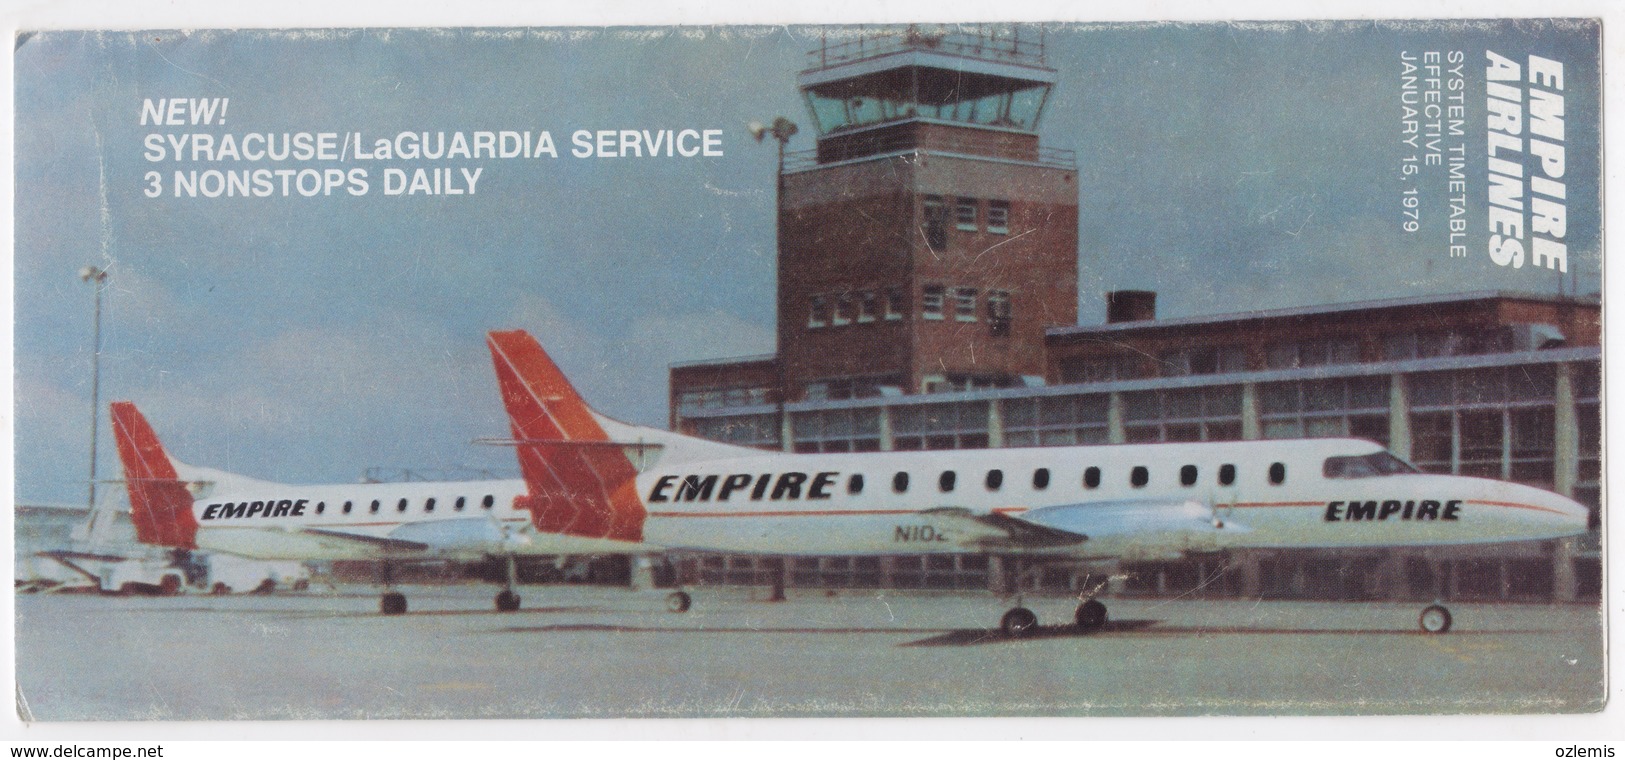 EMPIRE AIRLINES SYSTEM TIMETABLE EFFECTIVE JANUARY 15,1979 - Timetables